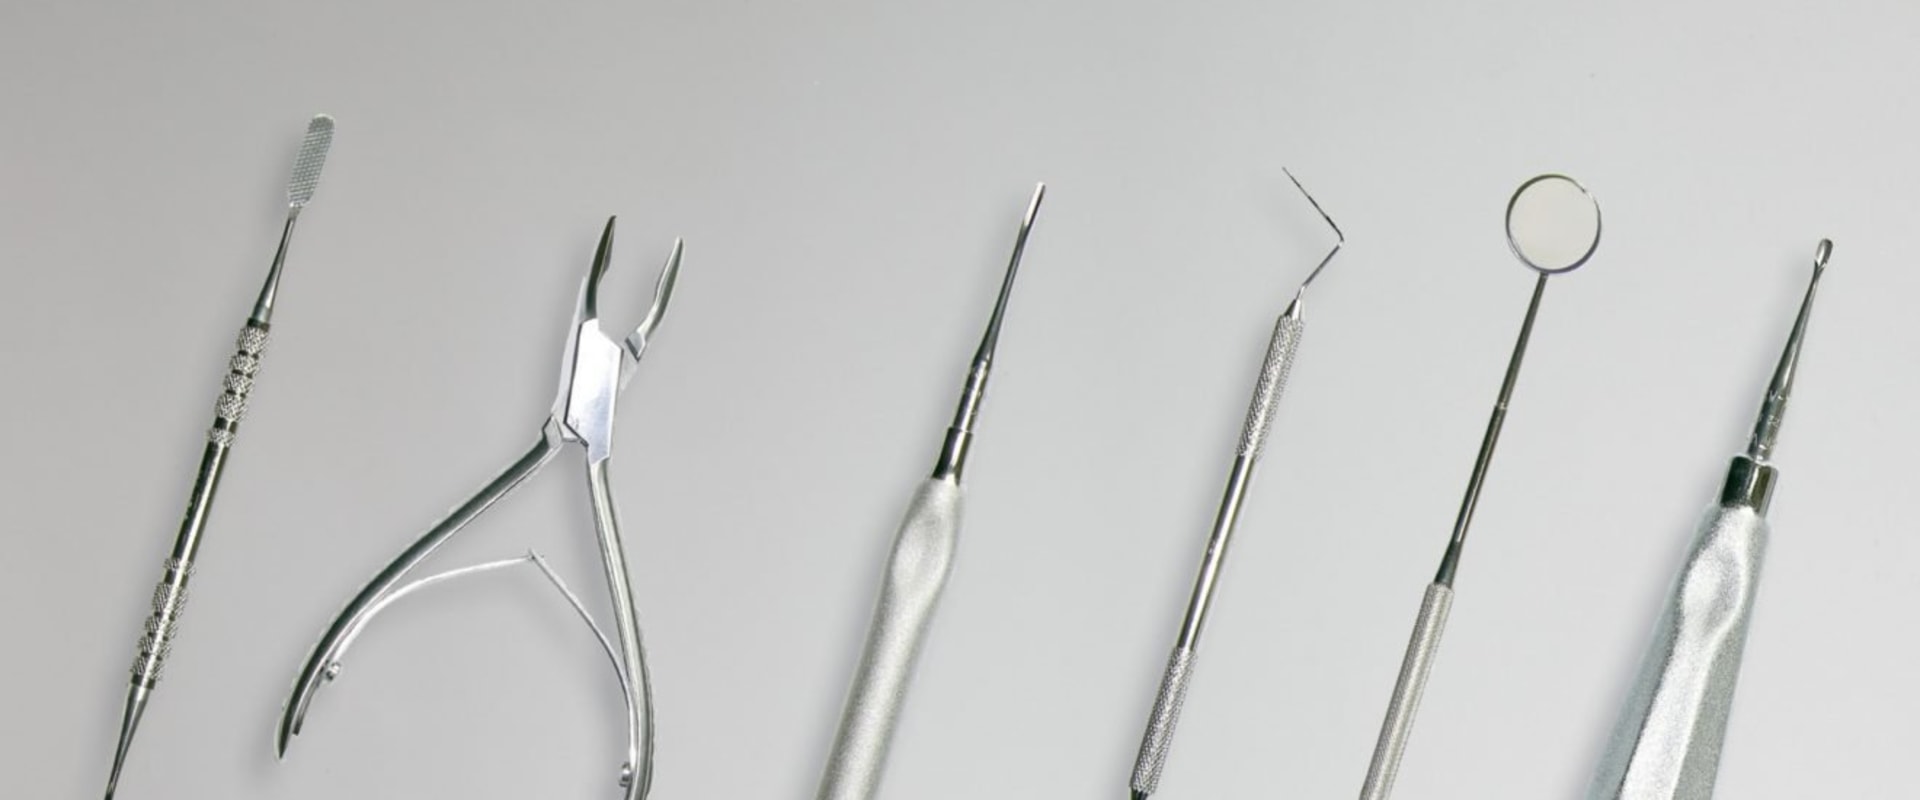 What Tools Do General Dentists Use? A Comprehensive Guide to the Equipment